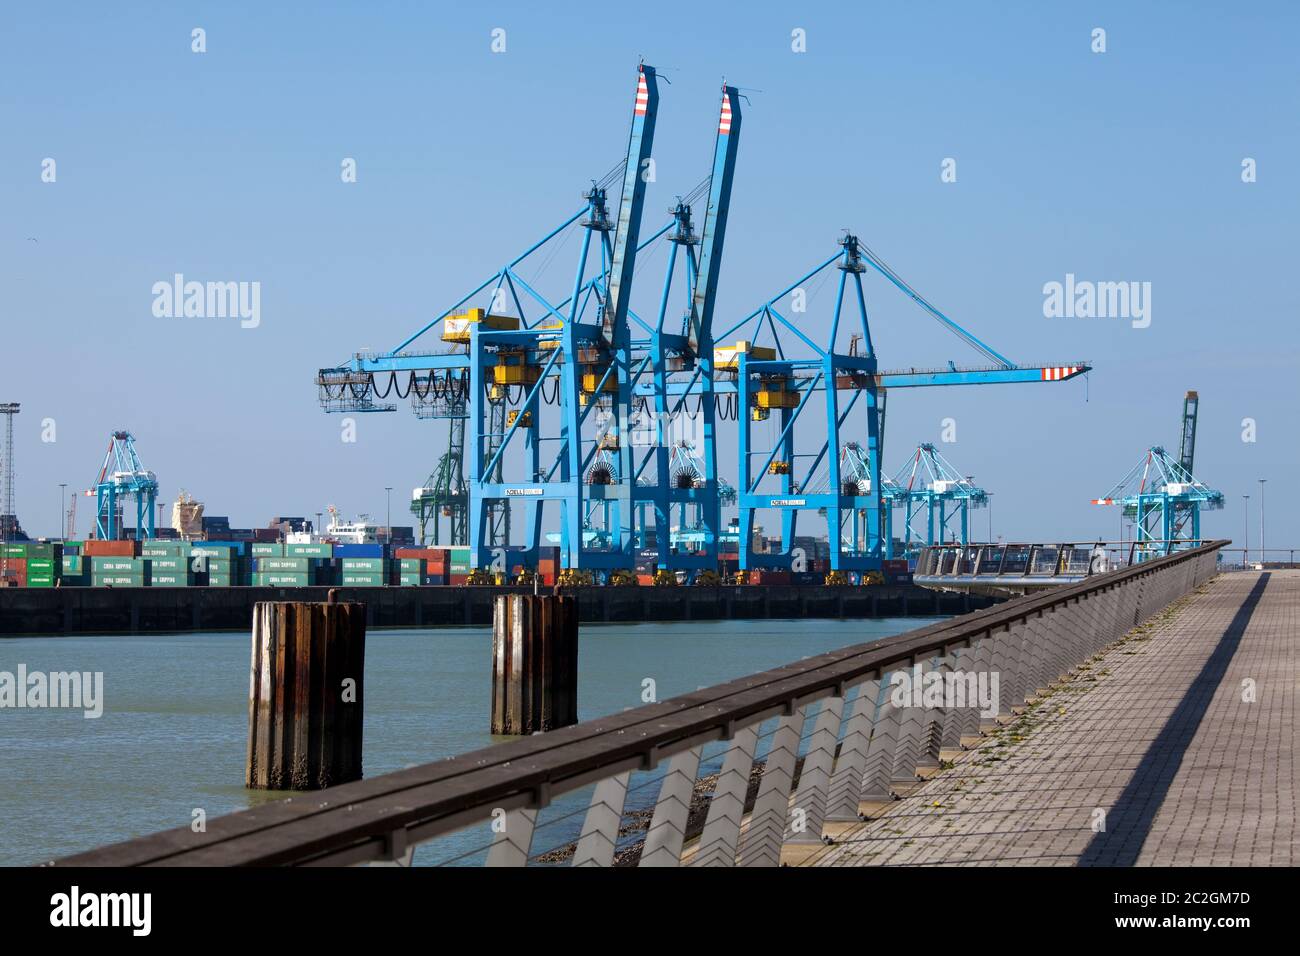 Cranes for lifting containers at the port of Zeebrugge (Seabruges), Belgium. Photo V.D. Stock Photo